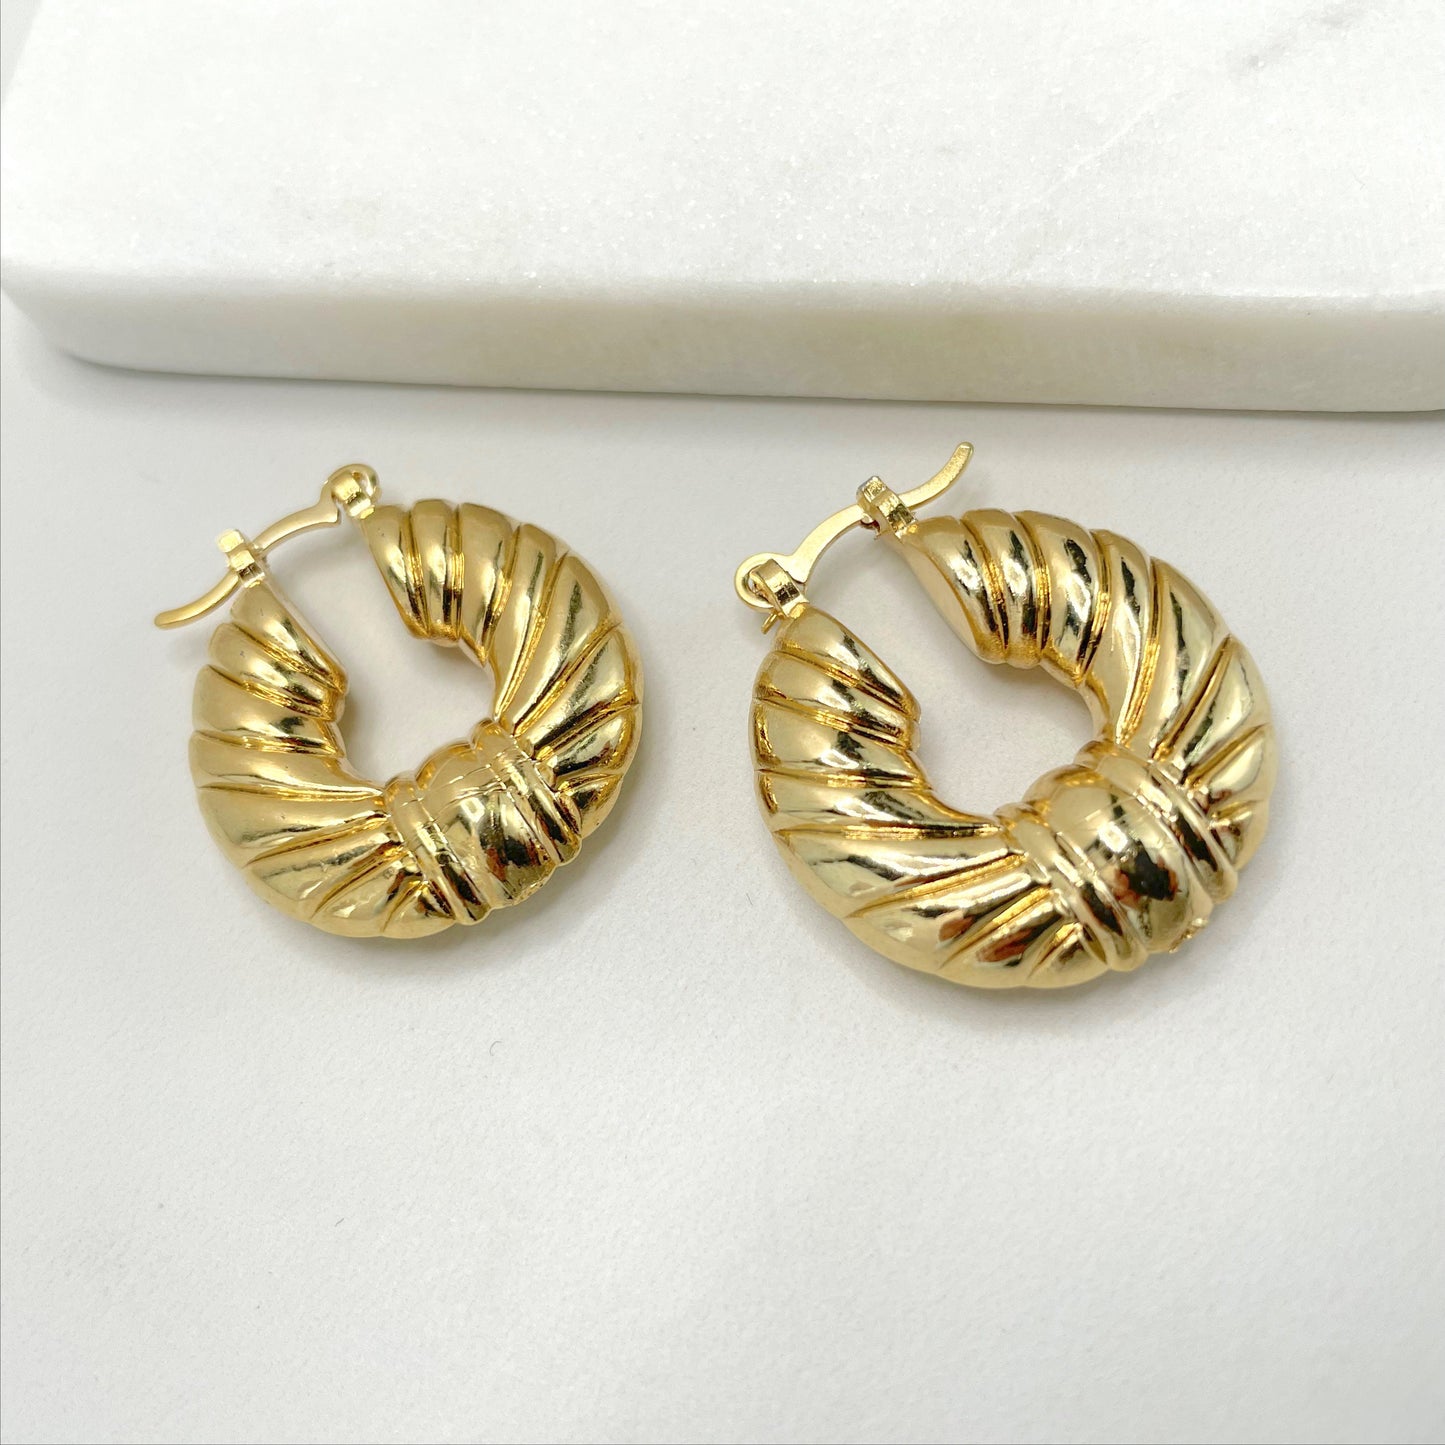 18k Gold Filled Twisted Hoops Earrings, Ribbon Bow Shape, Ultra Light, Wholesale Jewelry Making Supplies